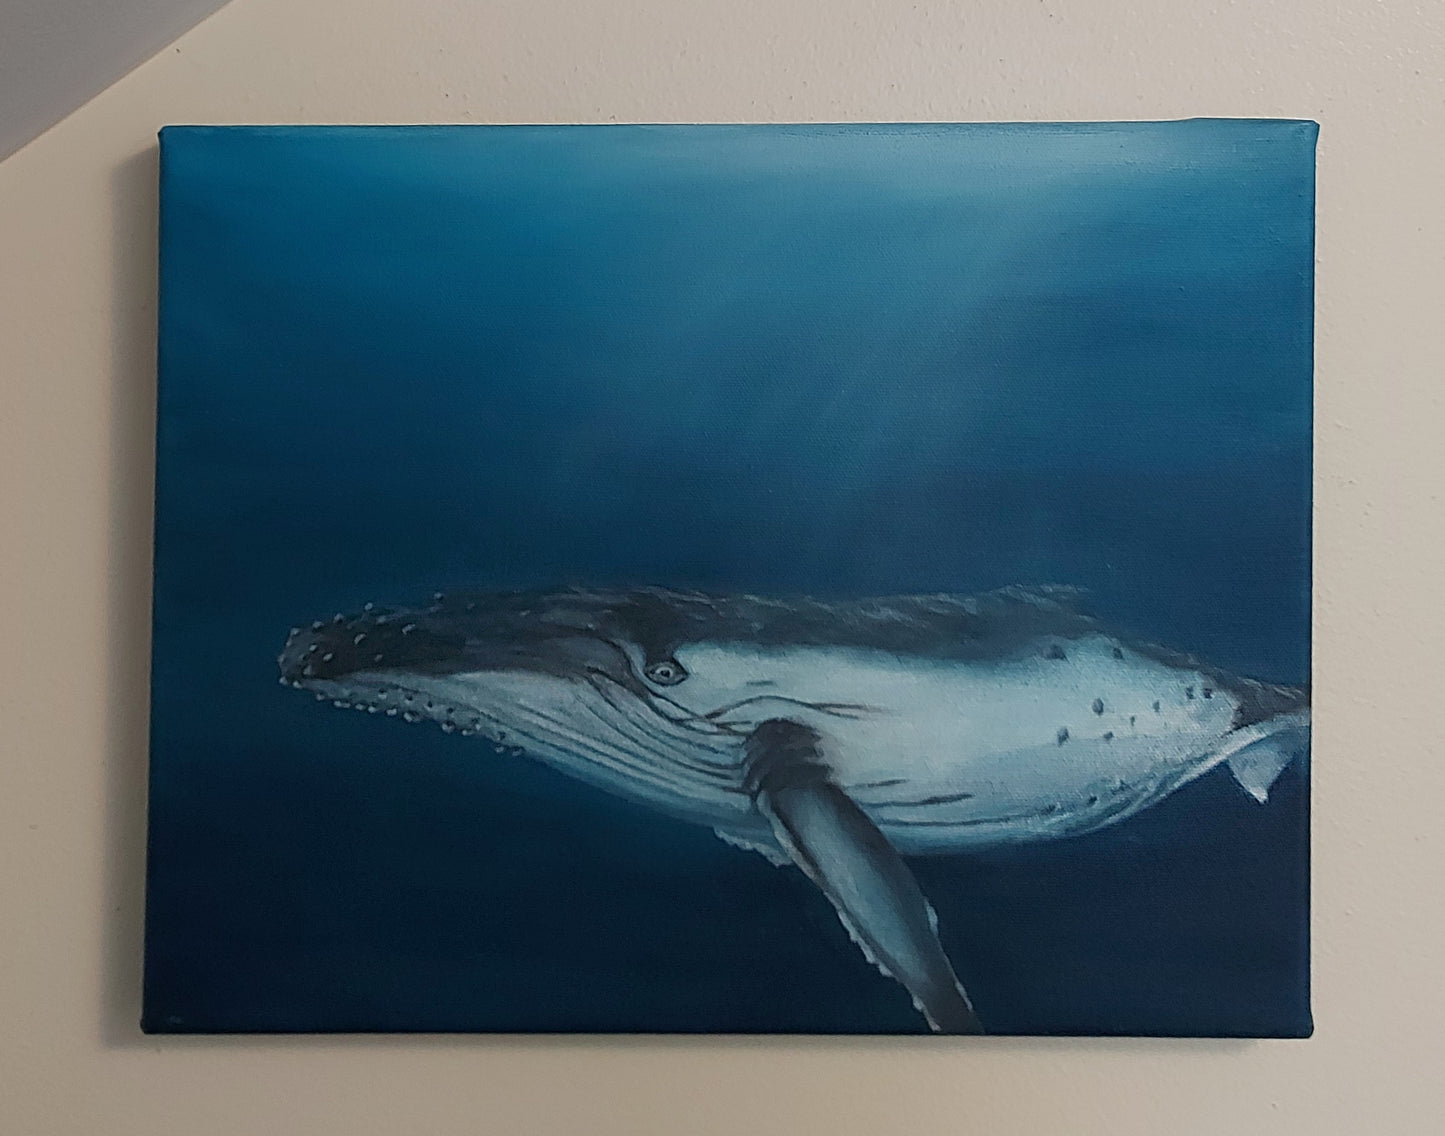 Pacific is an acrylic painting on canvas by Katherine Polack of an adult humpback whale in dark blue water as its left eye watches the viewer. Feel the calming presence as you lock eyes with this altruistic mammal swimming the dark blue ocean as the light shines through the surface. "Pacific" is 11 x 14" acrylic on canvas.